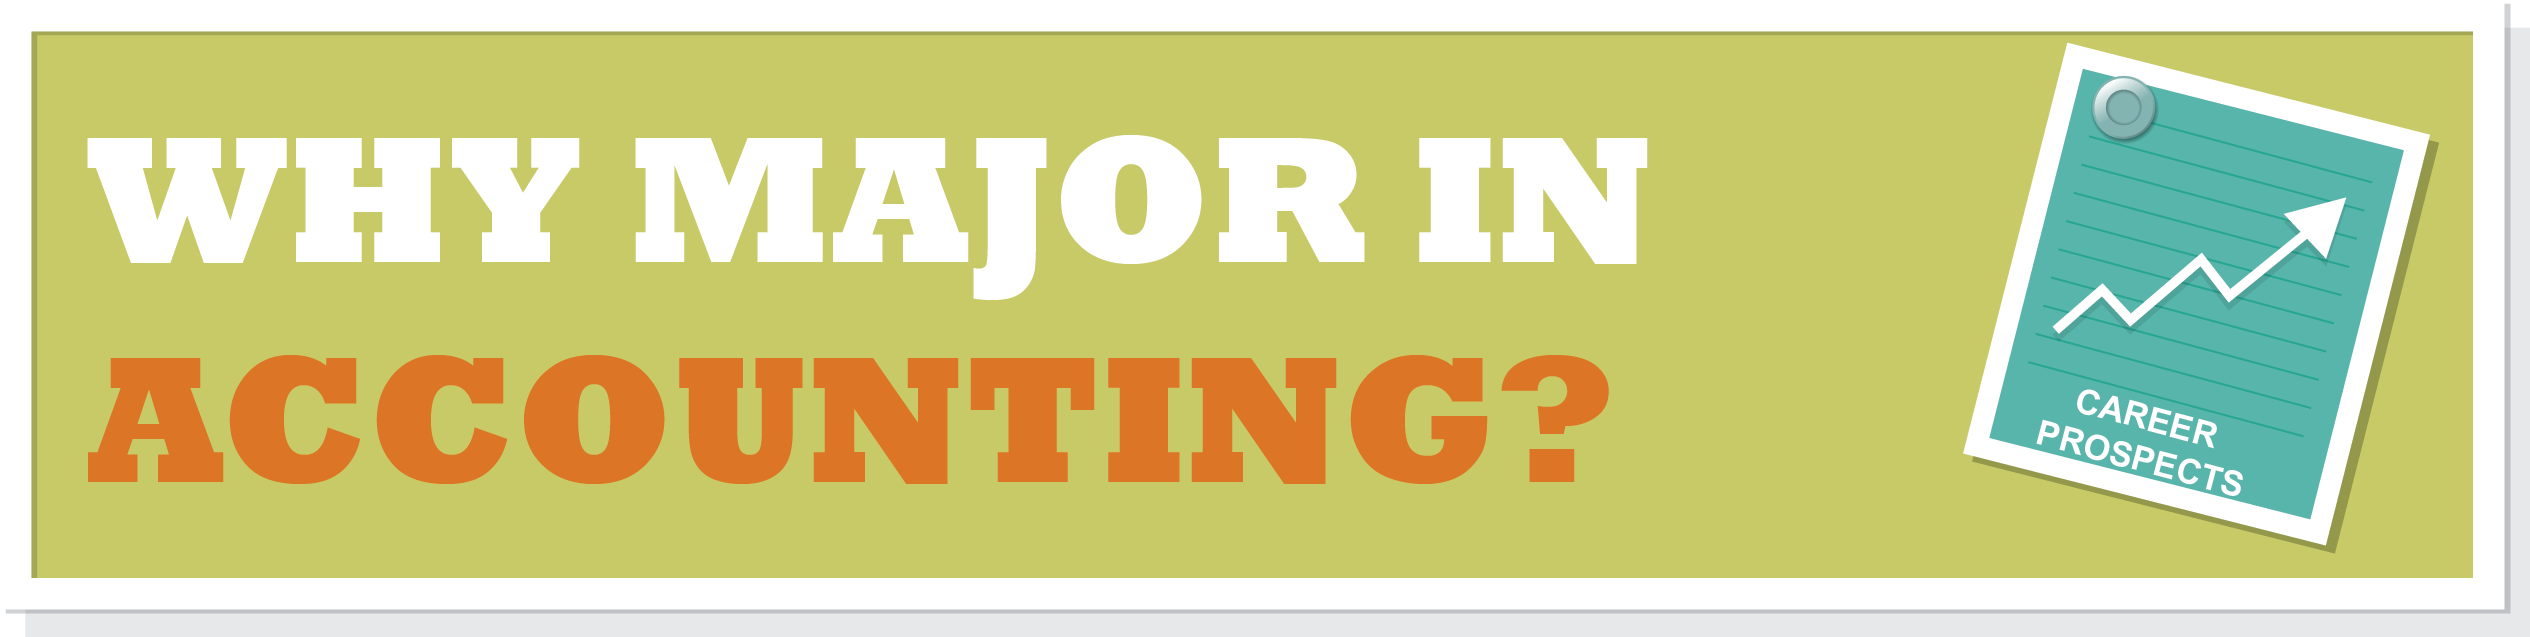 Why Major in Accounting? Header graphic